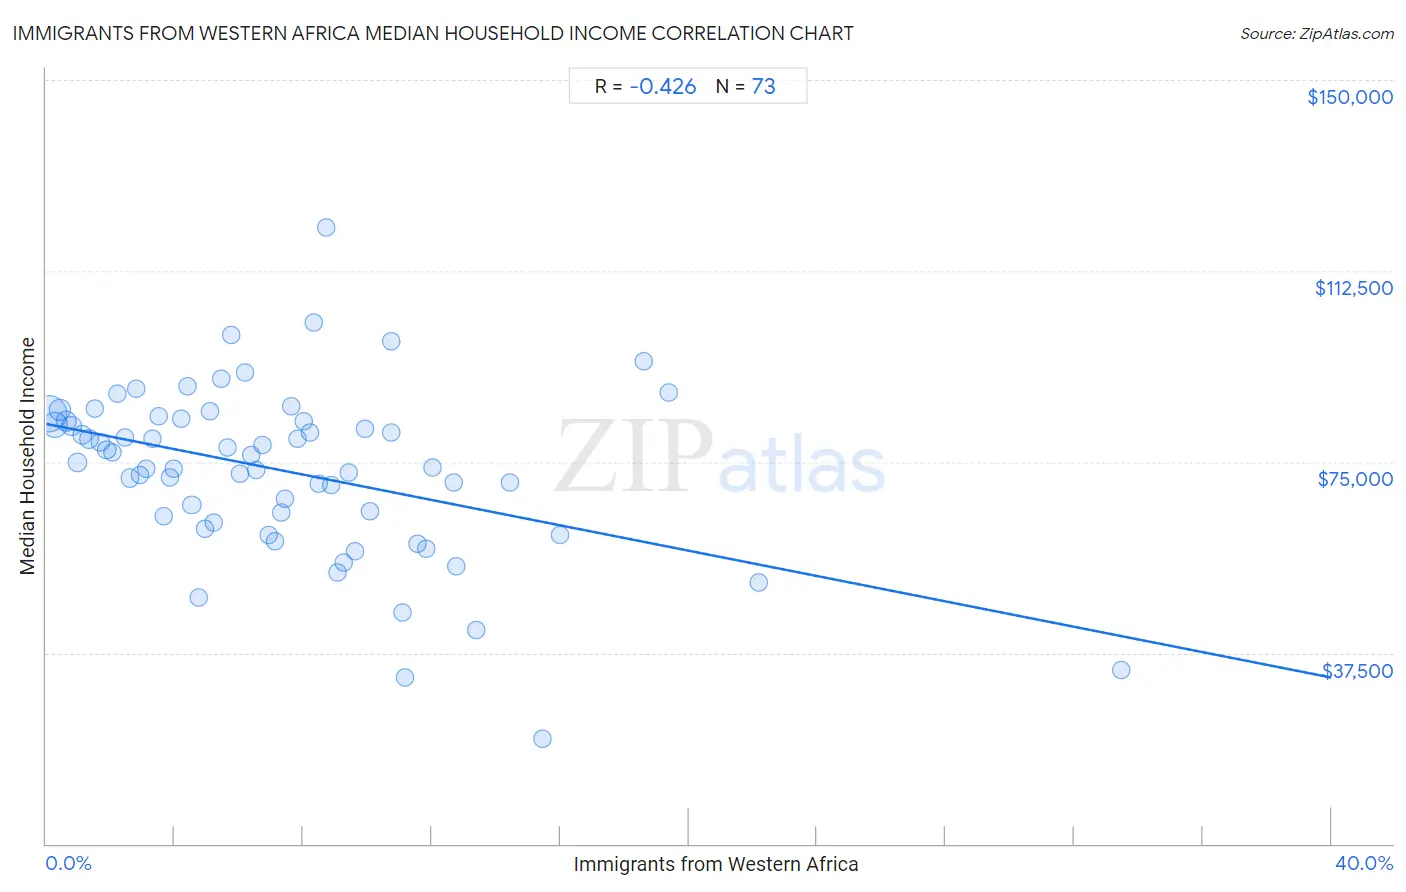 Immigrants from Western Africa Median Household Income